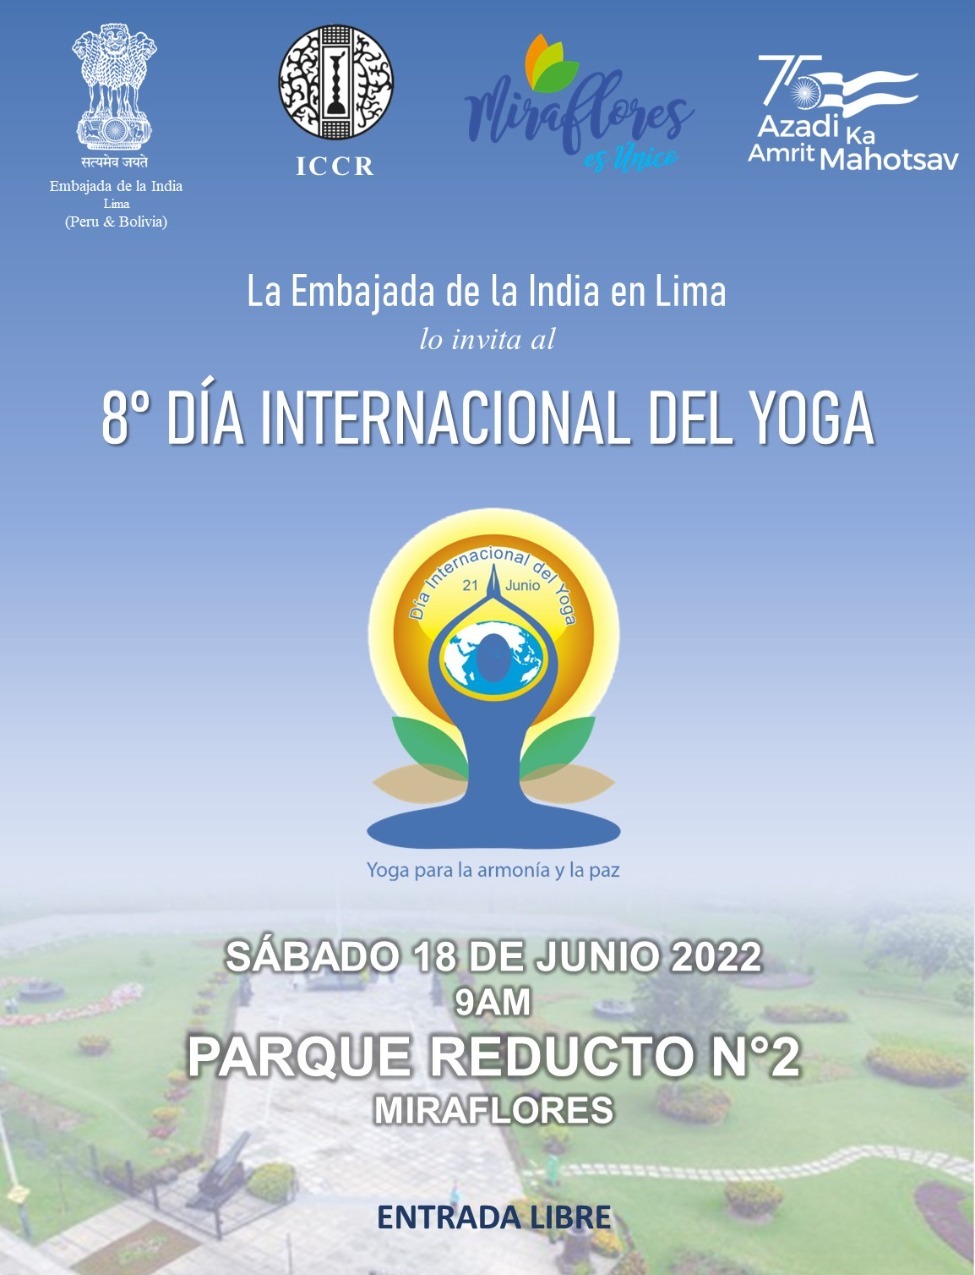 Celebration of 8th International Day of Yoga 2022 - Main Event in Peru